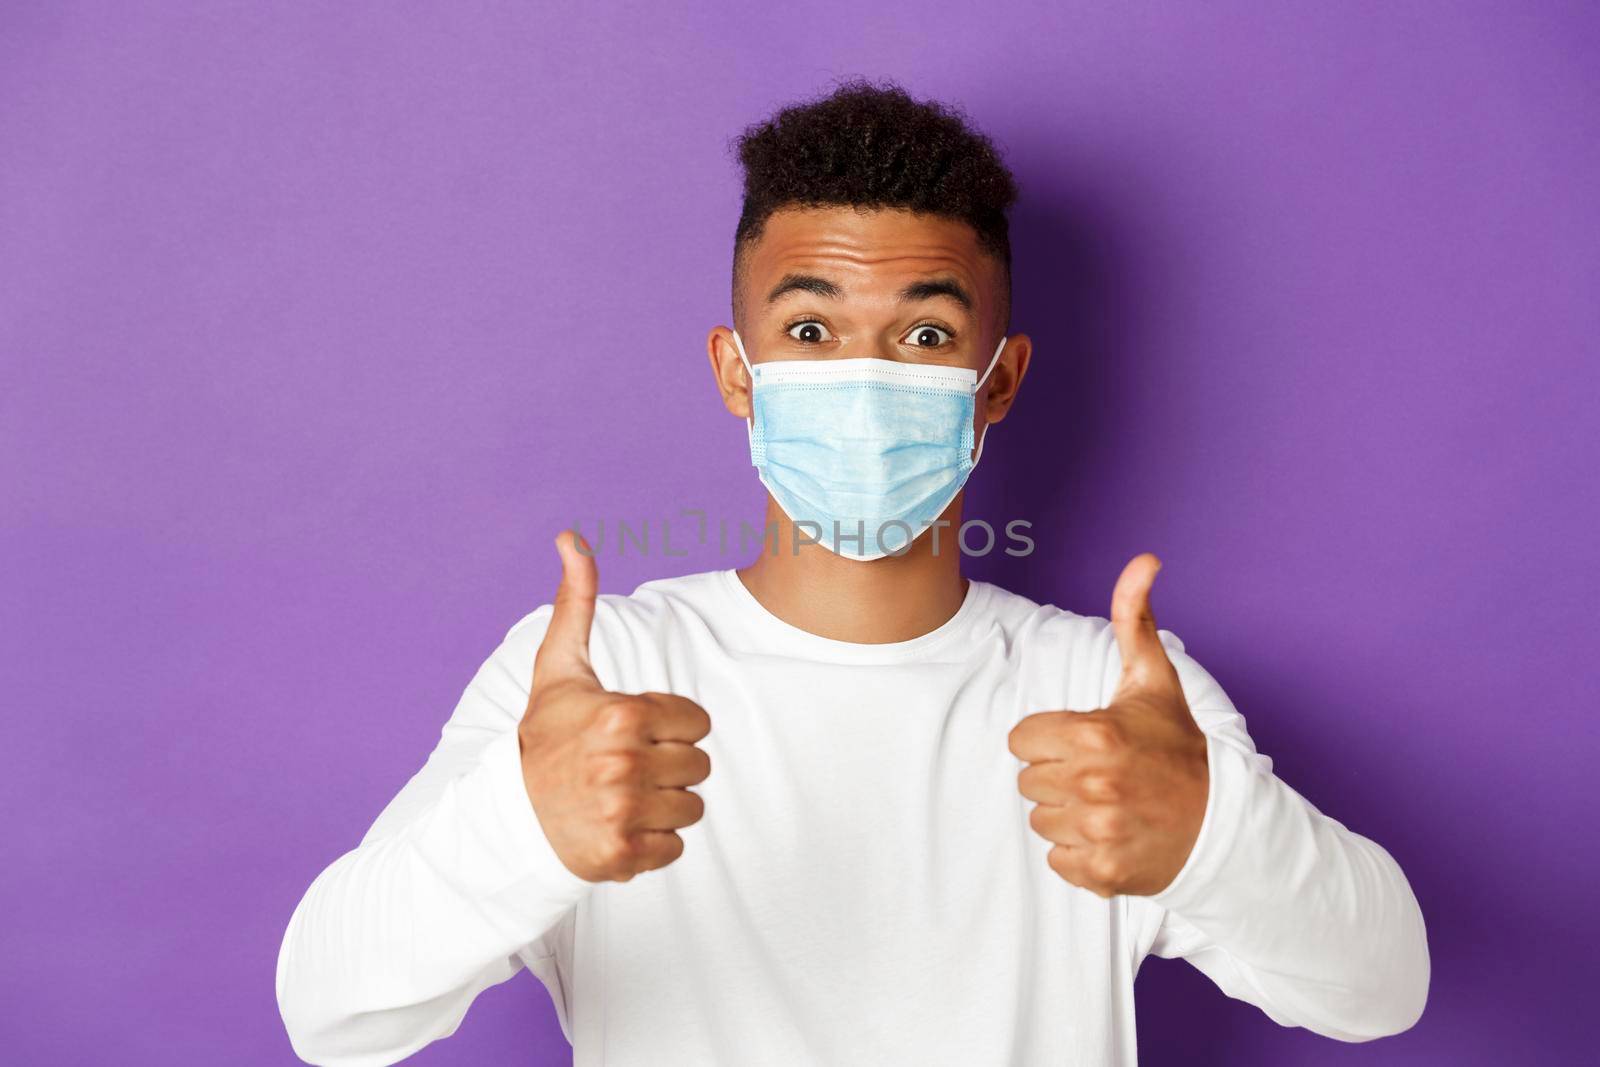 Concept of coronavirus, quarantine and social distancing. Close-up of young african-american guy in medical mask, looking excited and recommending something, showing thumbs-up in approval.